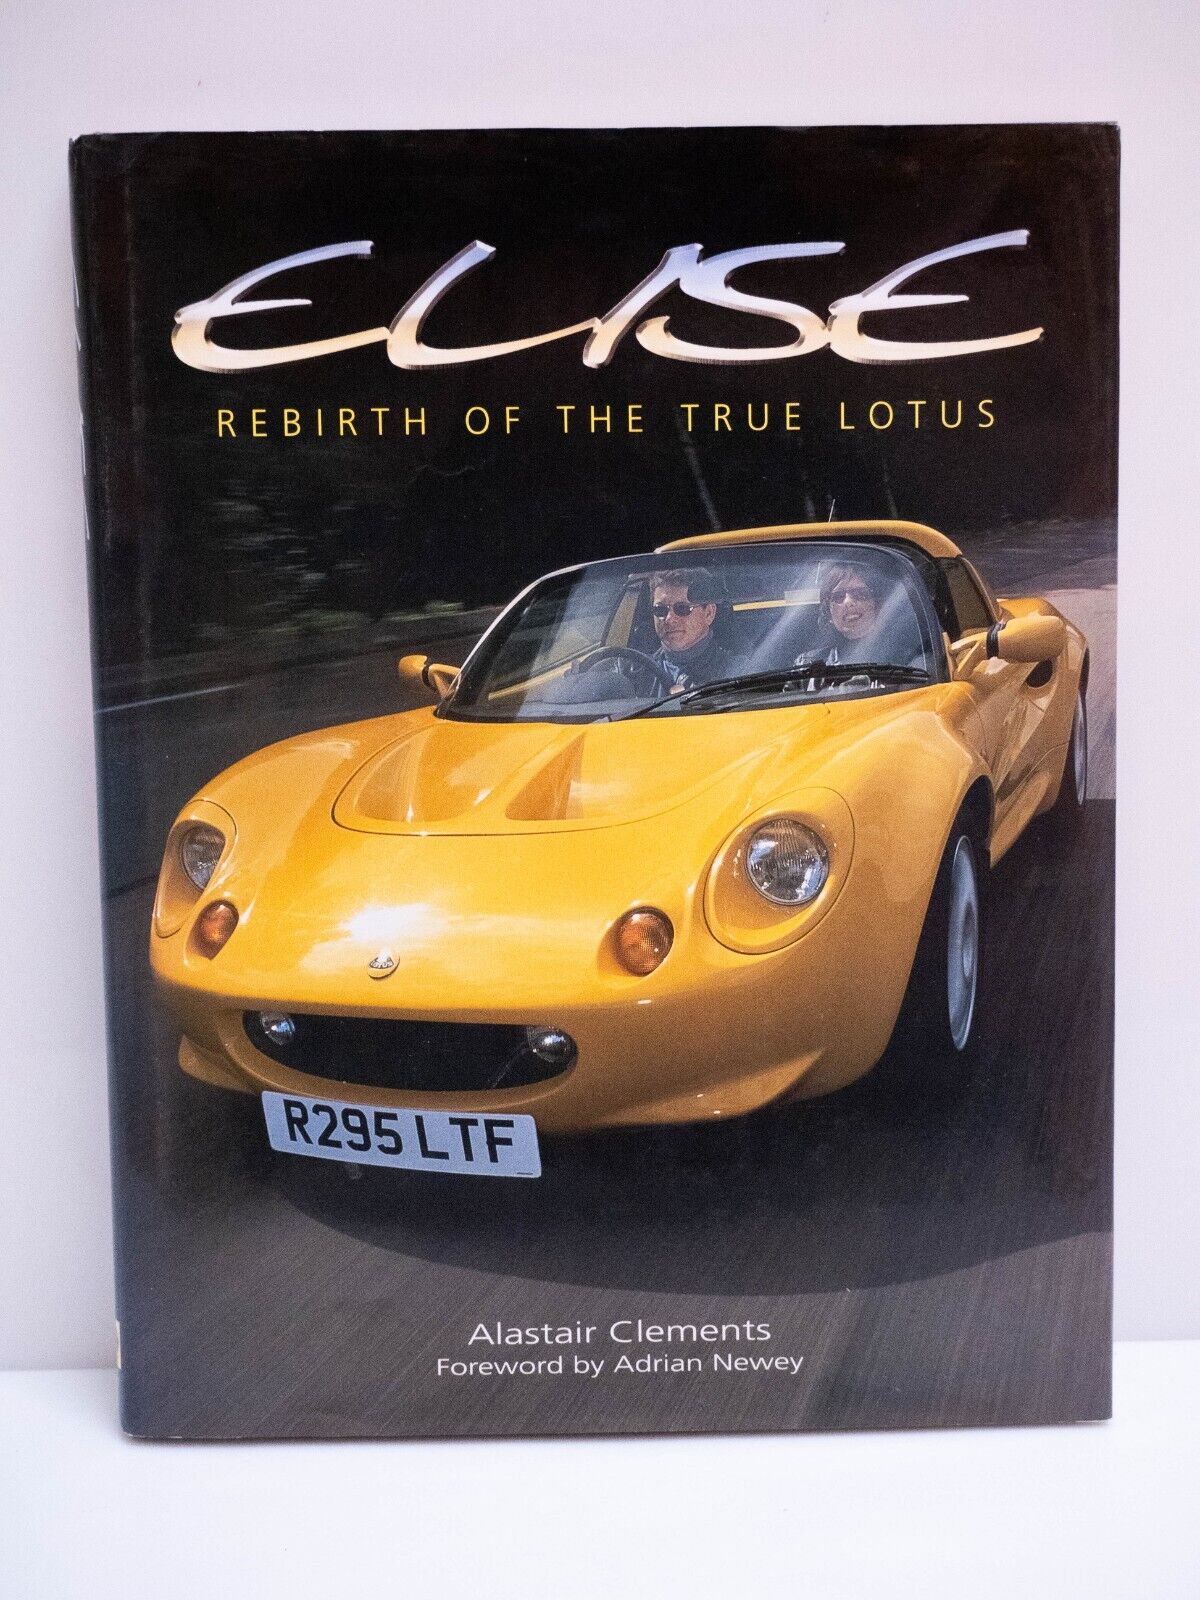 Elise - Rebirth of the True Lotus - Alastair Clements - Englisch - Hardcover